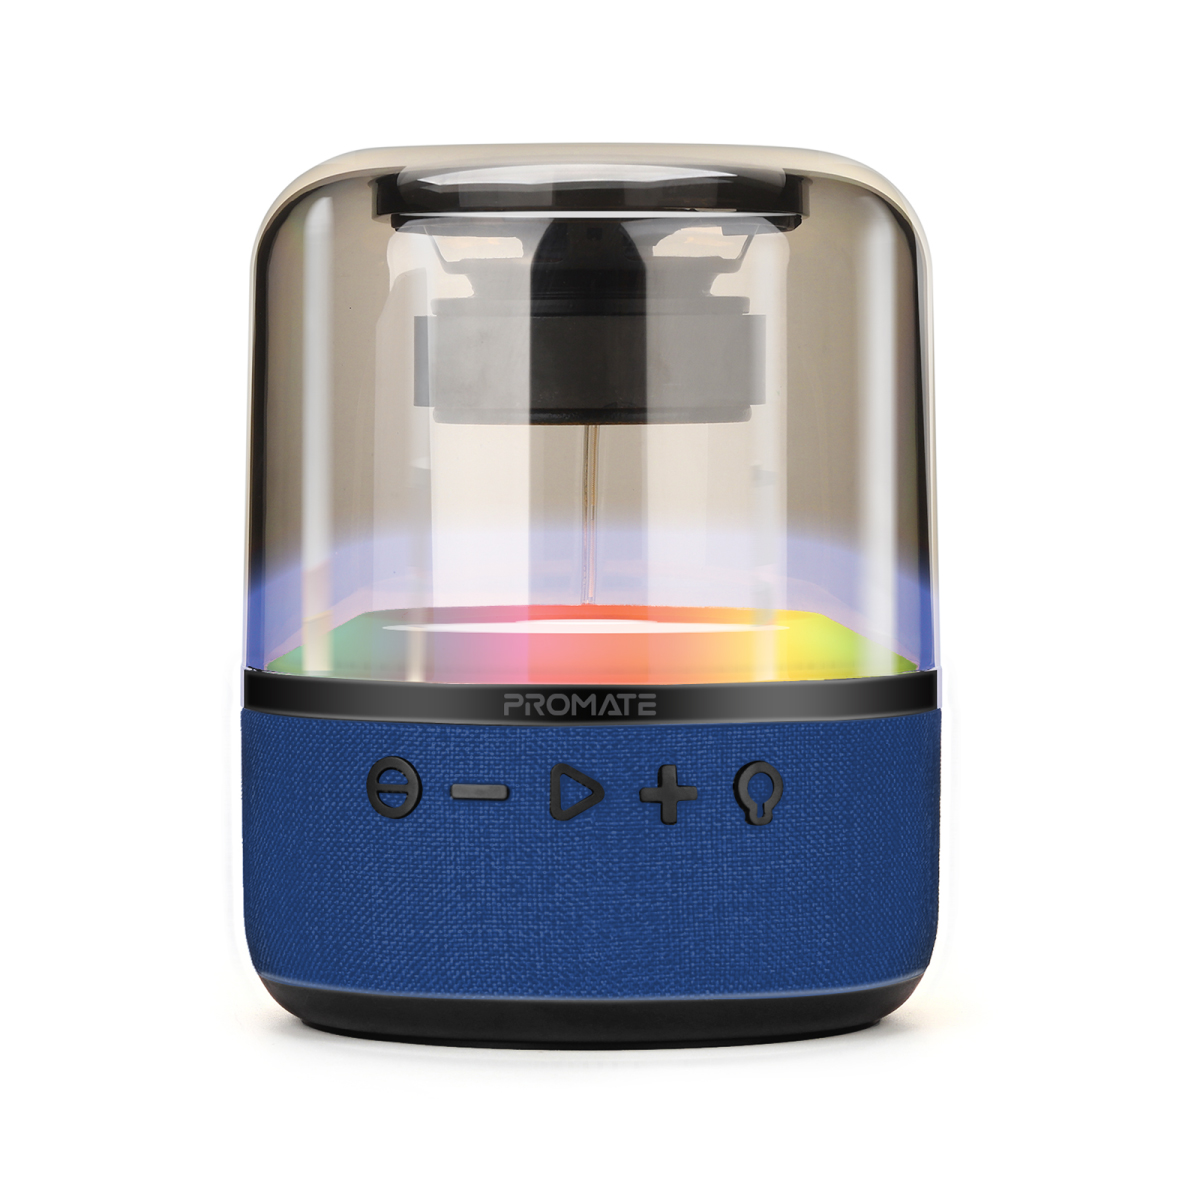 Promate Bluetooth Speaker, Premium 10W True Wireless Portable LED Speaker with 360-Degree HD Sound, Light Show, 6H Playtime, 3.5mm Audio Jack, USB Port and TF Card Slot for iPhone 14, iPad Air, iPod, Glitz-L.Blue